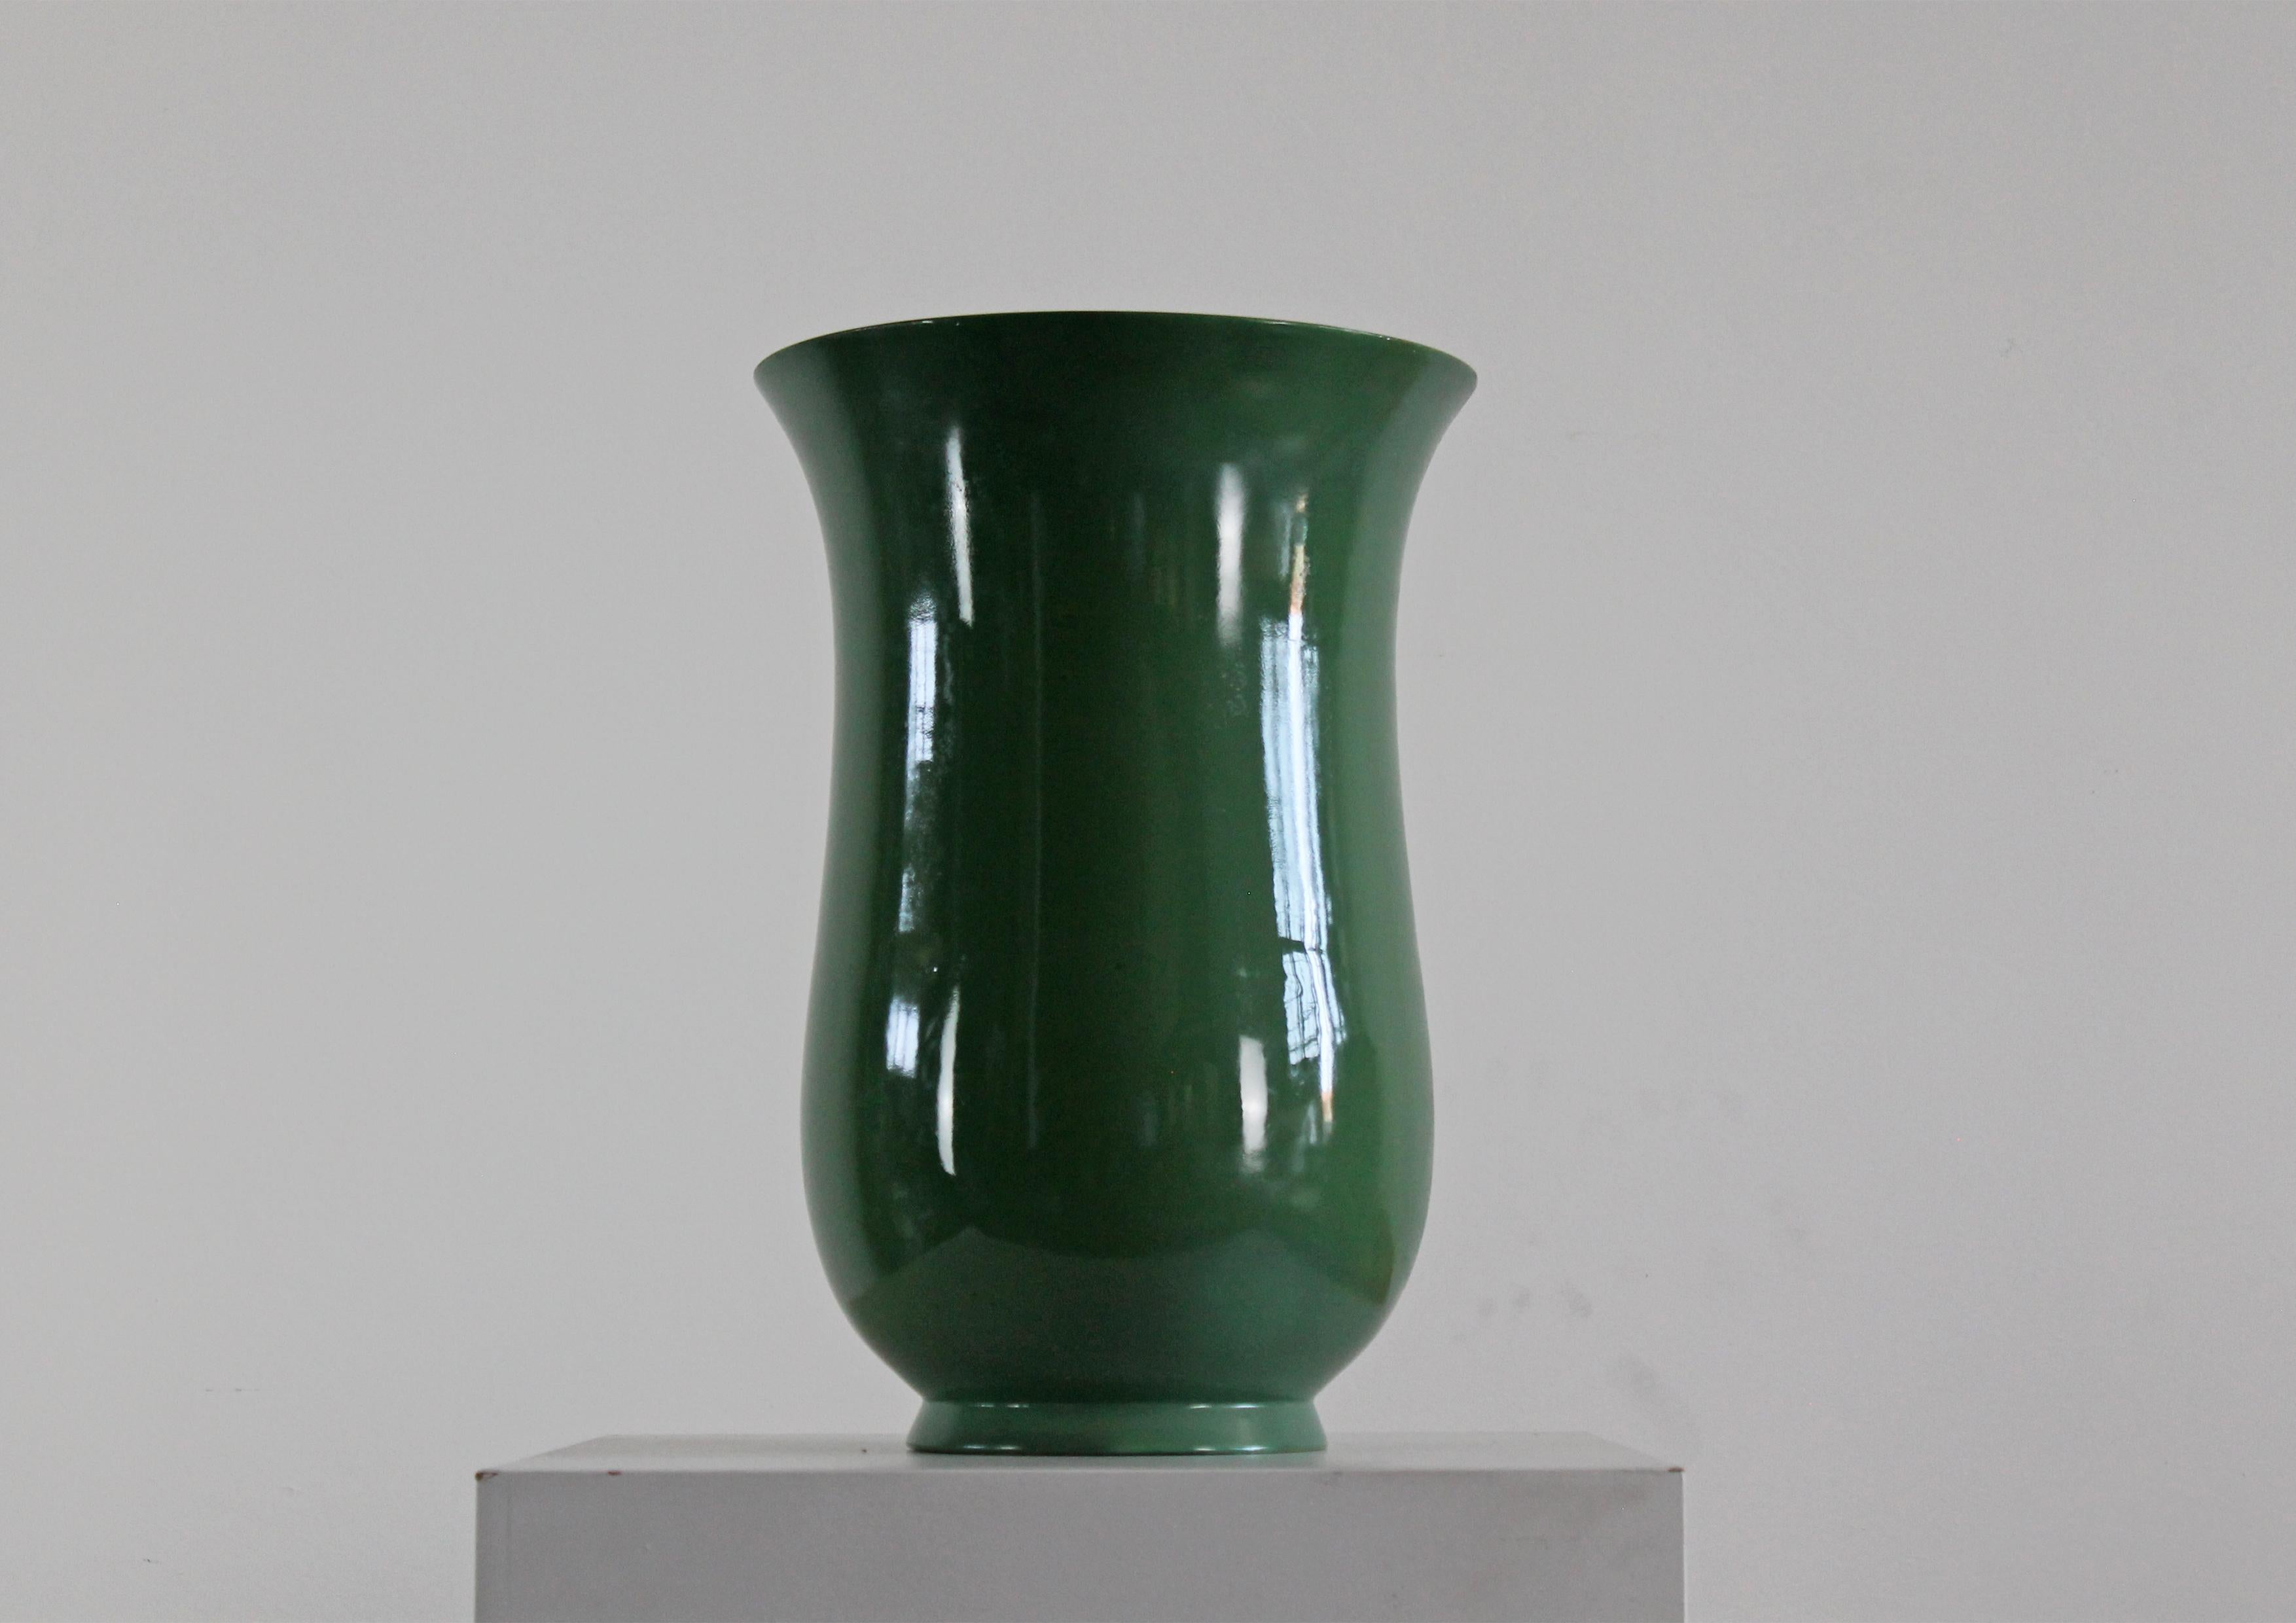 Mid-Century Modern Gio Ponti Large Green Vase in Ceramic by Richard Ginori 1930s Italy For Sale